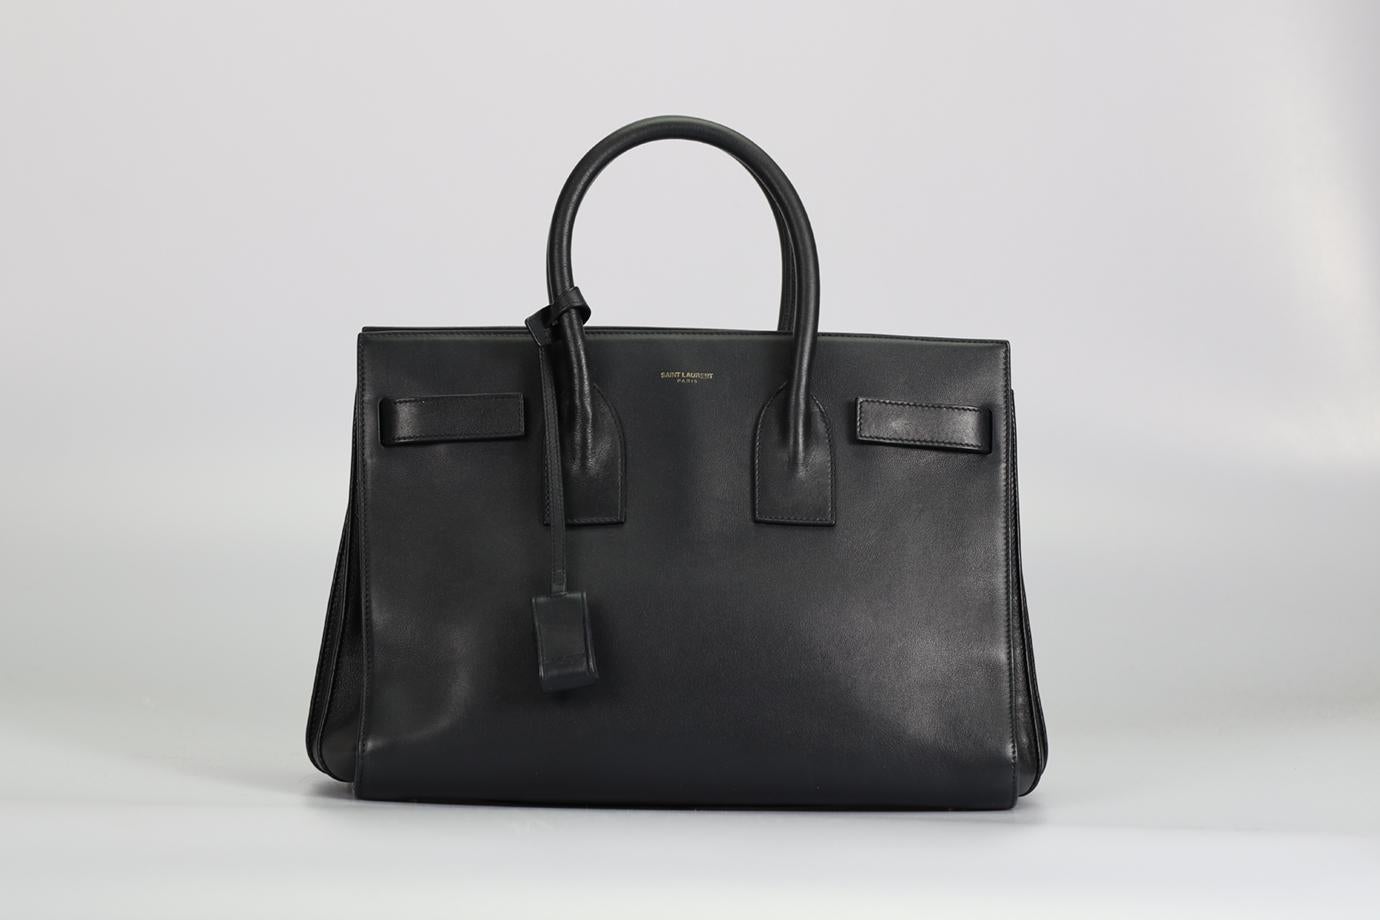 Saint Laurent Sac Du Jour Small Leather Tote Bag In Good Condition For Sale In London, GB